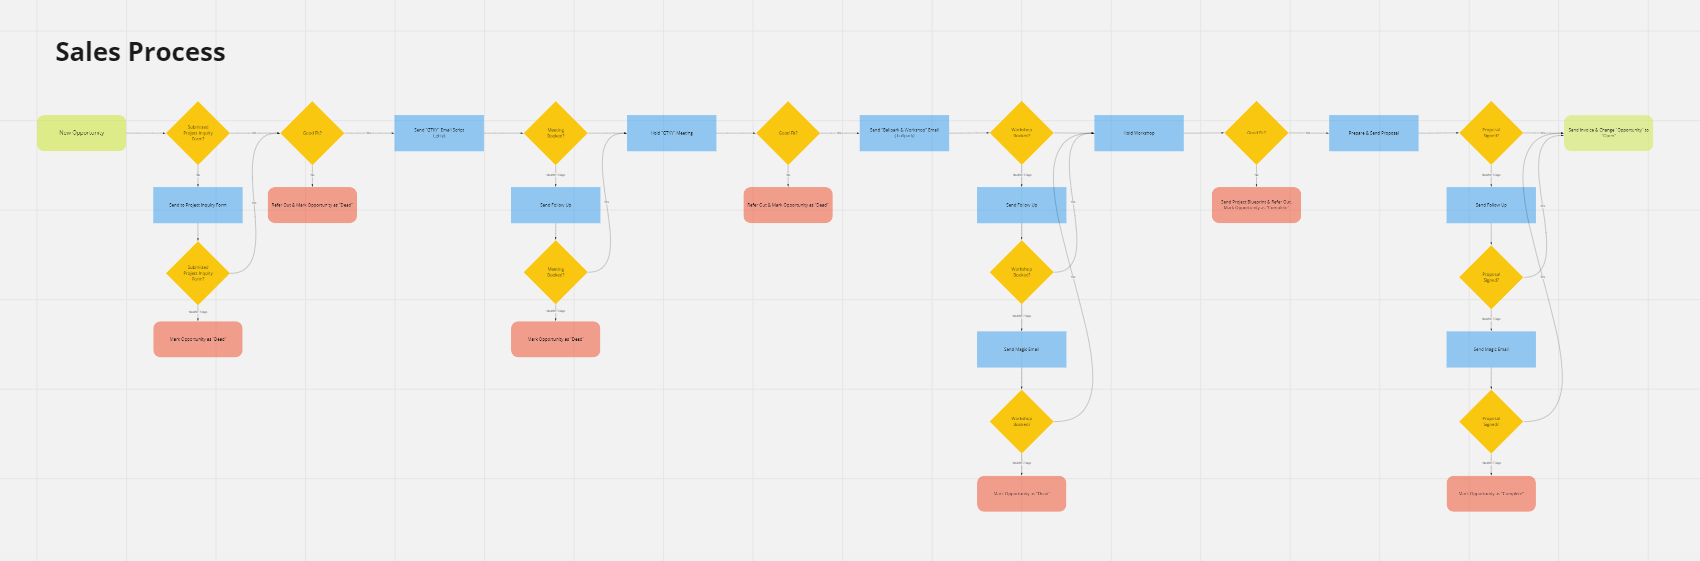 A screenshot of my sales process visualized in a flowchart.